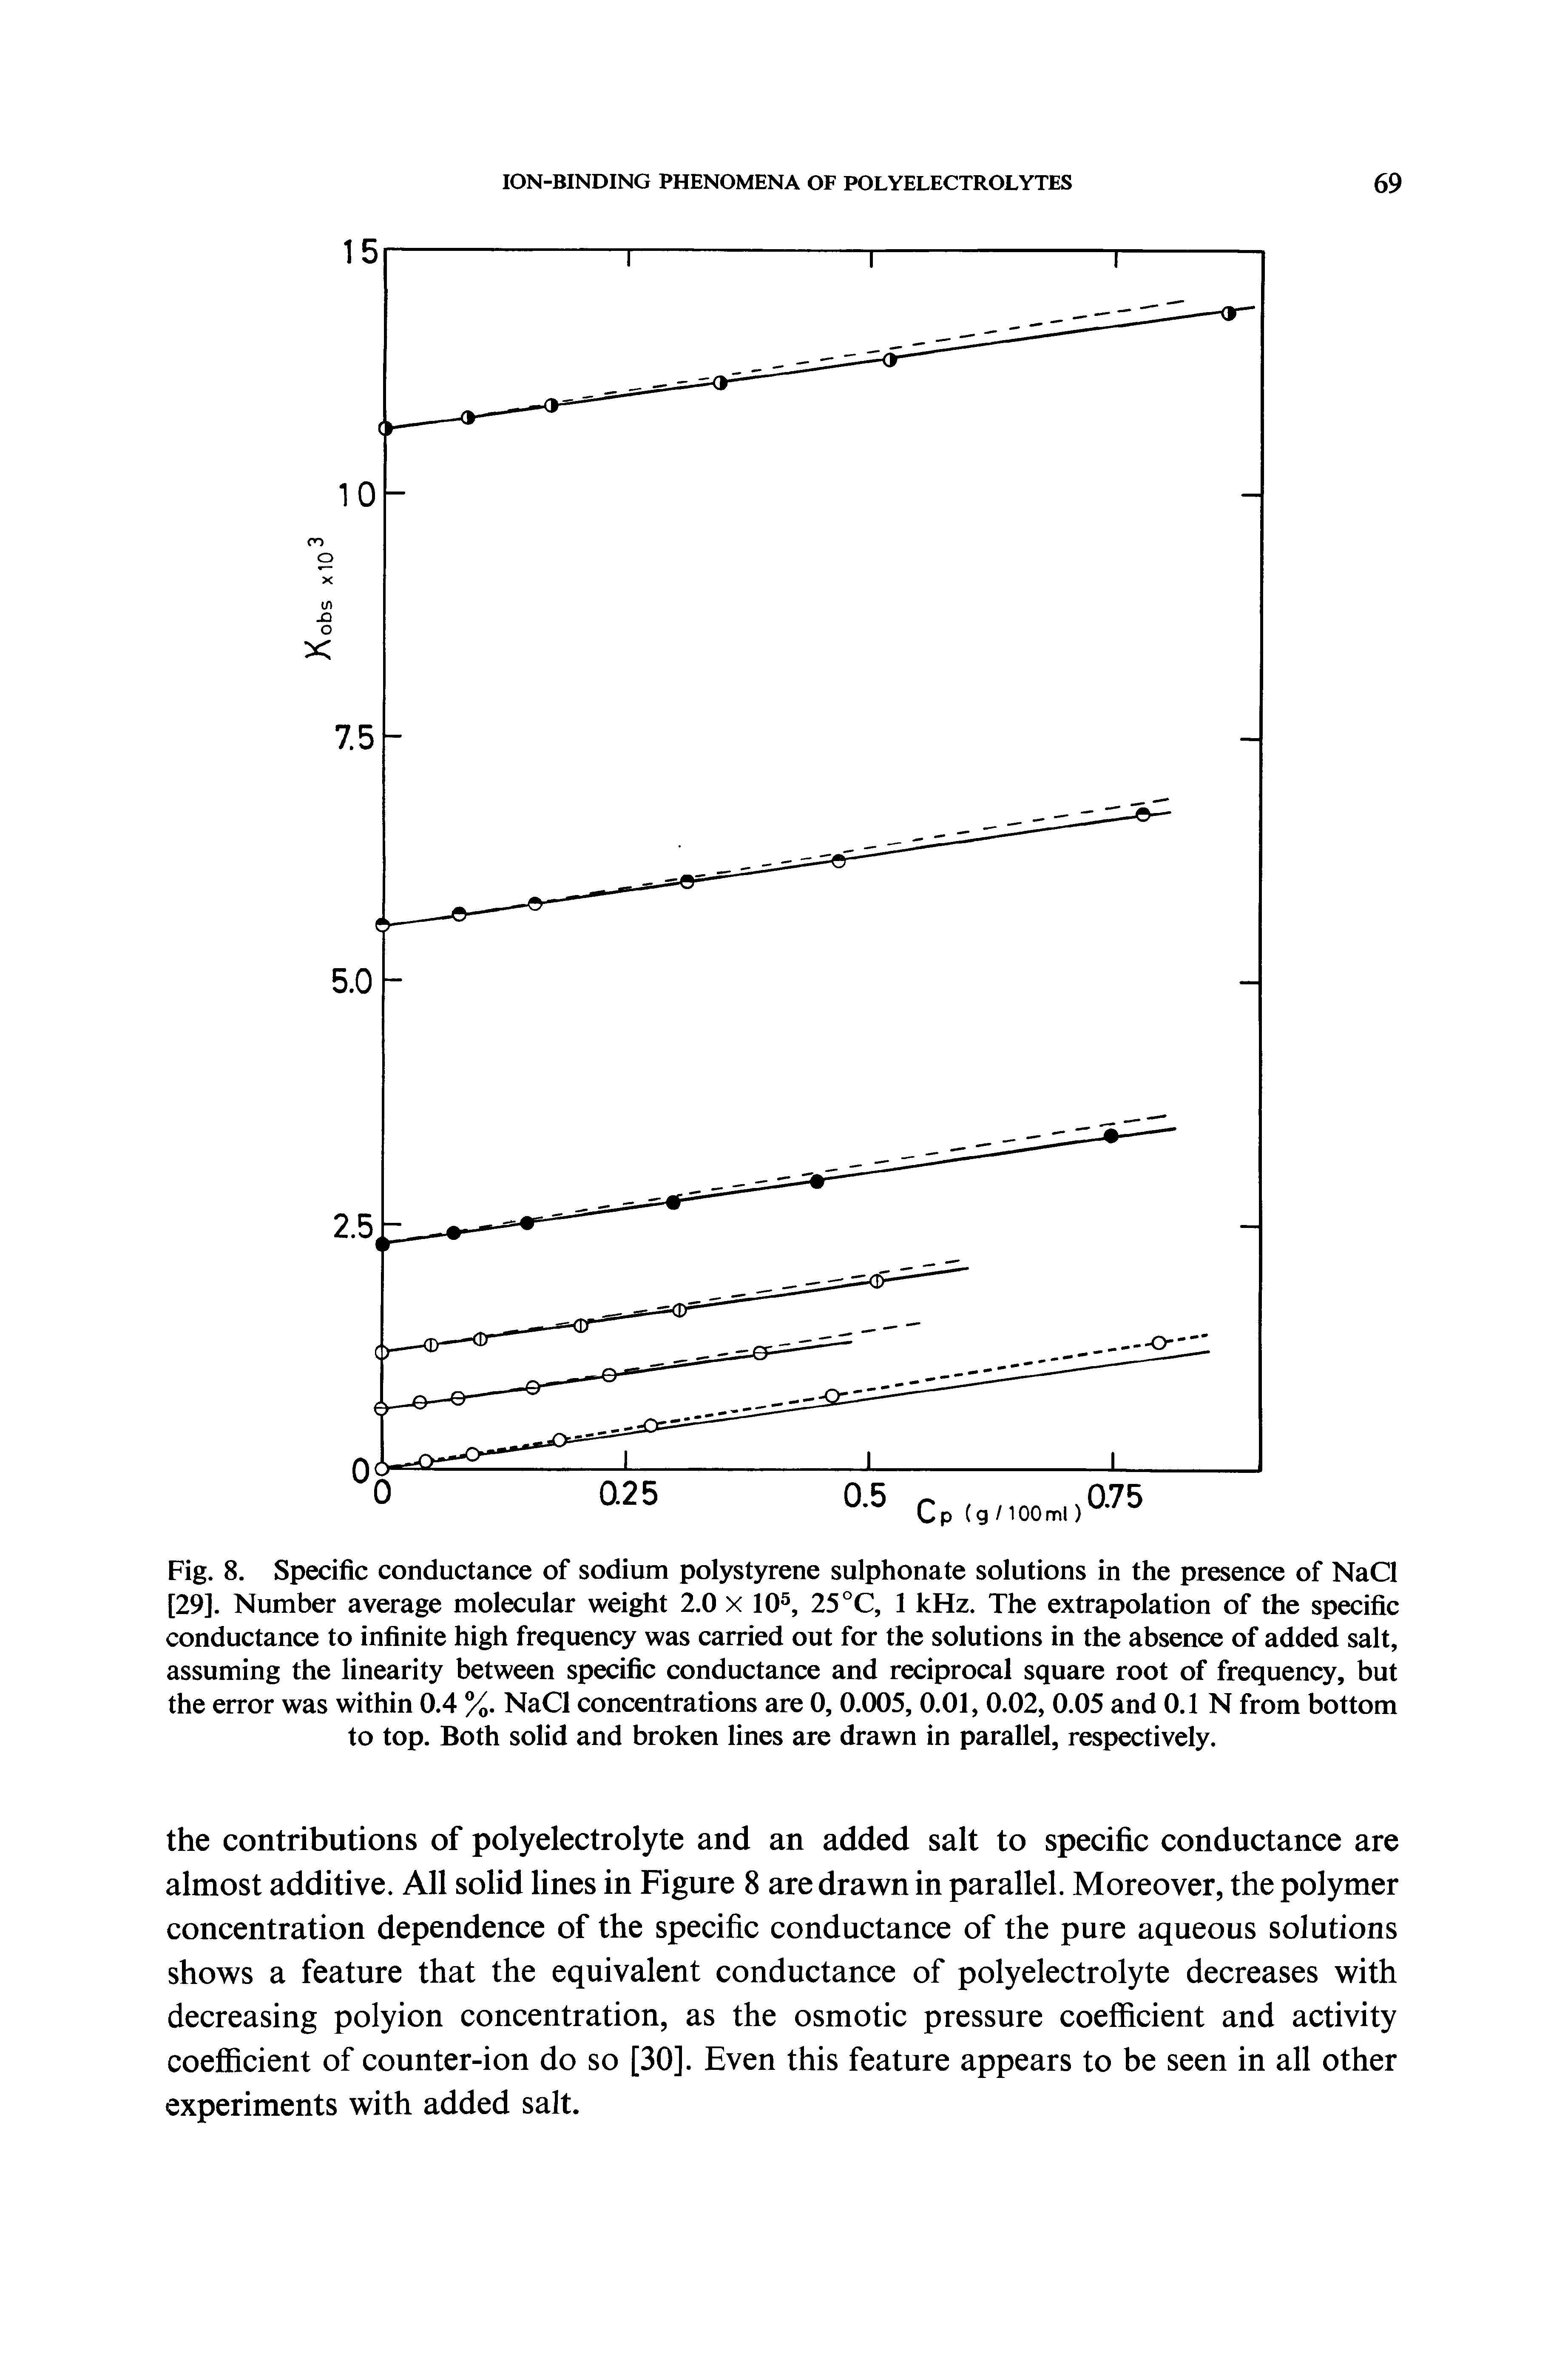 Fig. 8. Specific conductance of sodium polystyrene sulphonate solutions in the presence of NaCl [29]. Number average molecular weight 2.0 x 10, 25 °C, 1 kHz. The extrapolation of the specific conductance to infinite high frequency was carried out for the solutions in the absence of added salt, assuming the linearity between specific conductance and reciprocal square root of frequency, but the error was within 0.4 %. NaCl concentrations are 0, 0.005, 0.01, 0.02, 0.05 and 0.1 N from bottom to top. Both solid and broken lines are drawn in parallel, respectively.